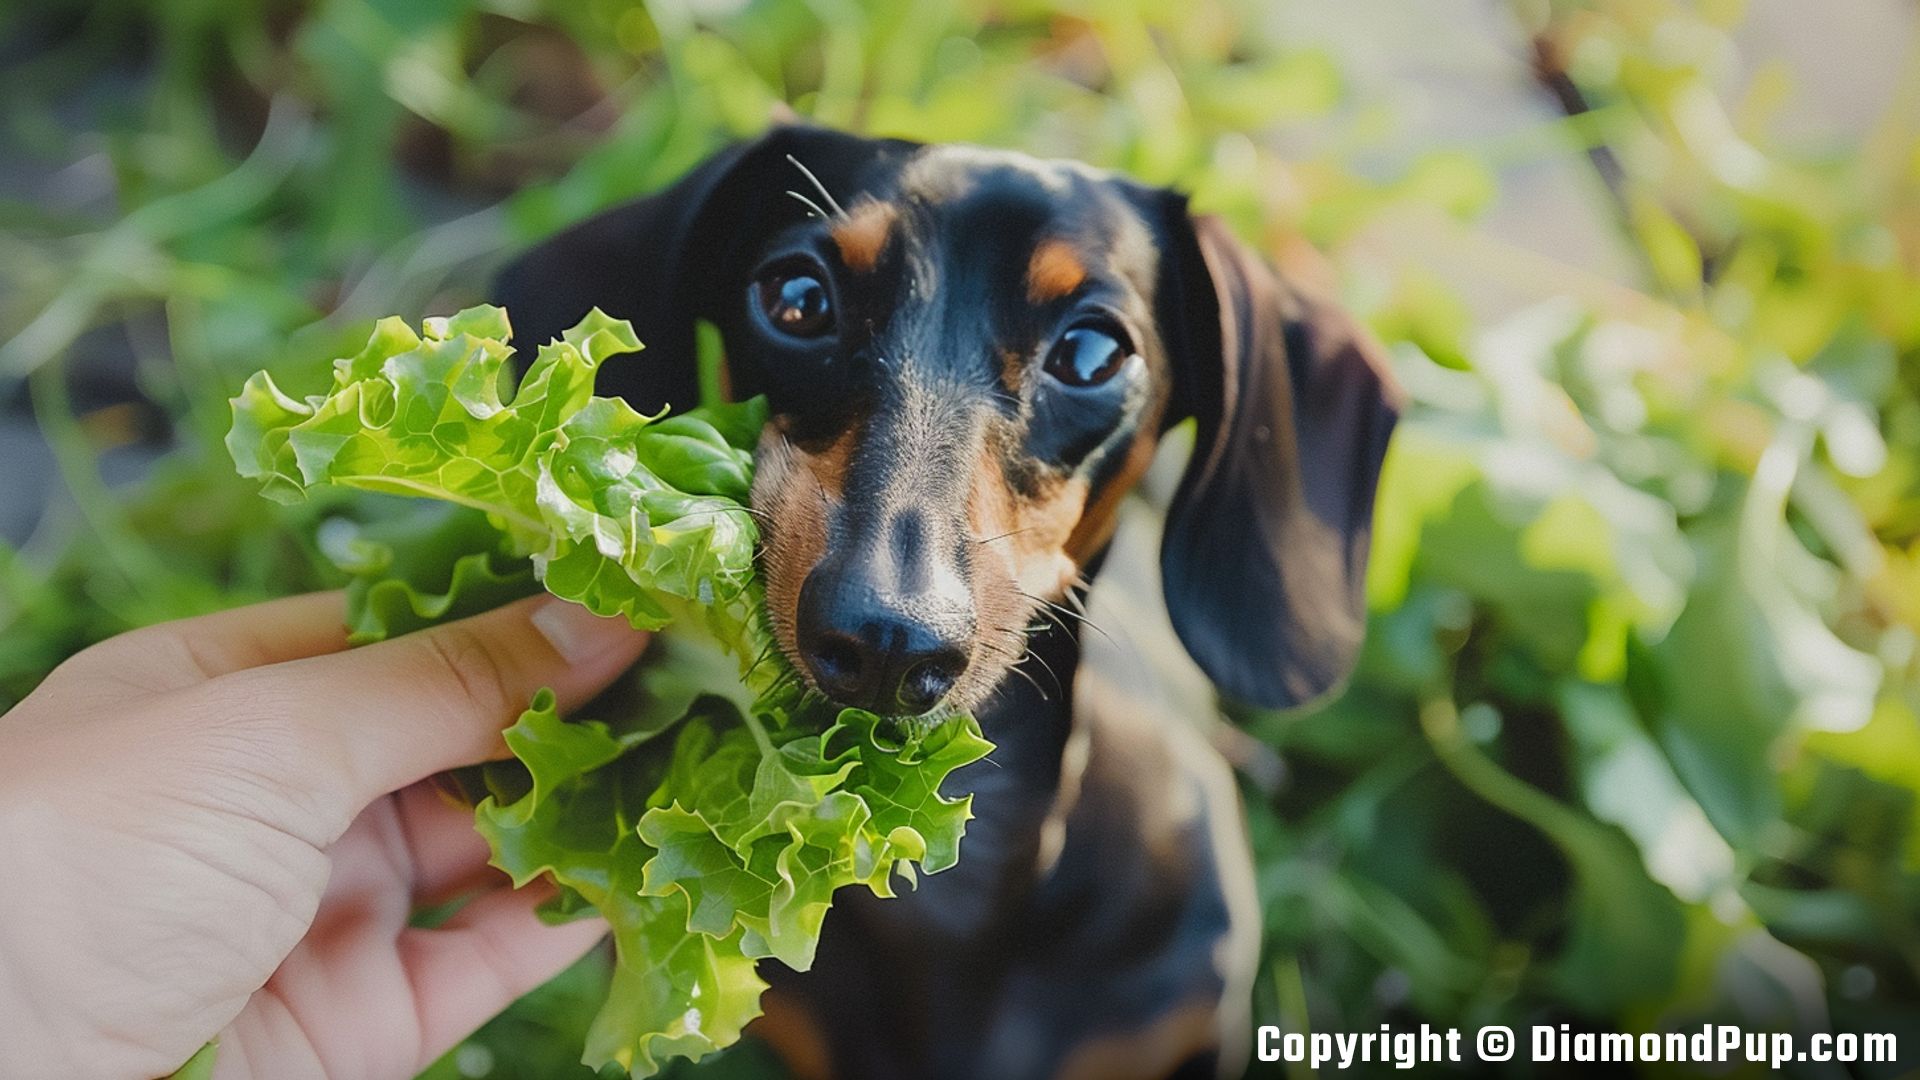 Picture of an Adorable Dachshund Eating Lettuce